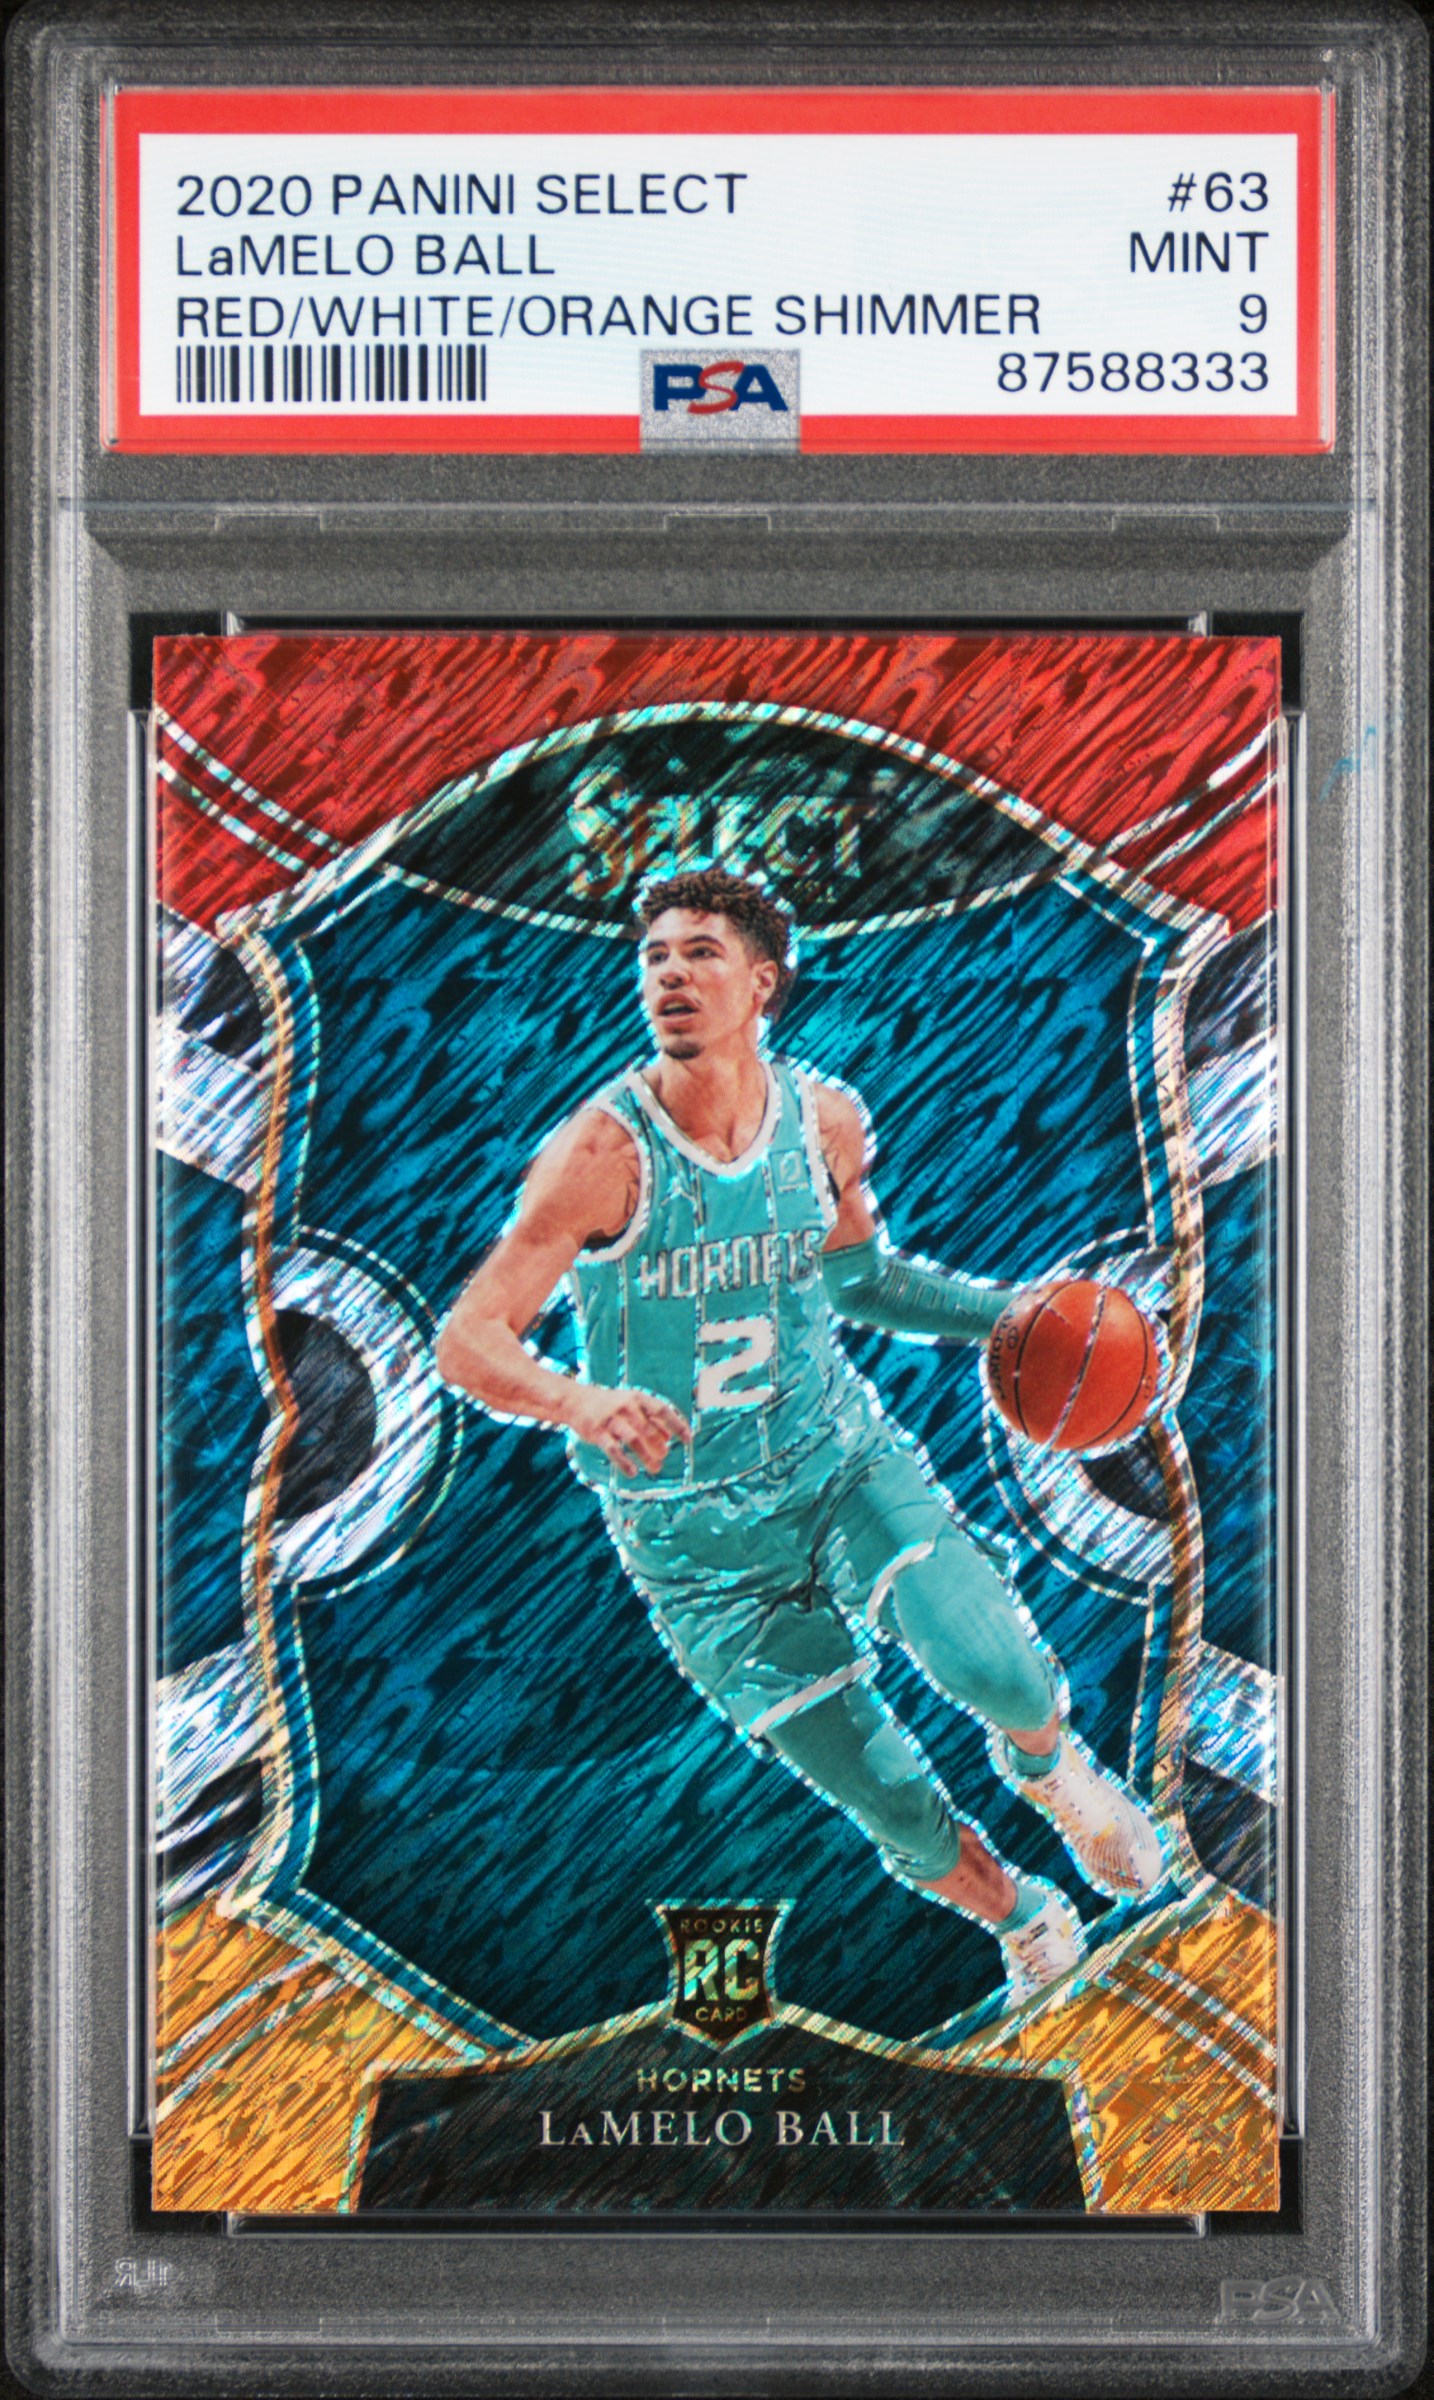 2020-21 Panini Select Red/White/Orange Shimmer  #63 LaMelo Ball Rookie Card – PSA MINT 9